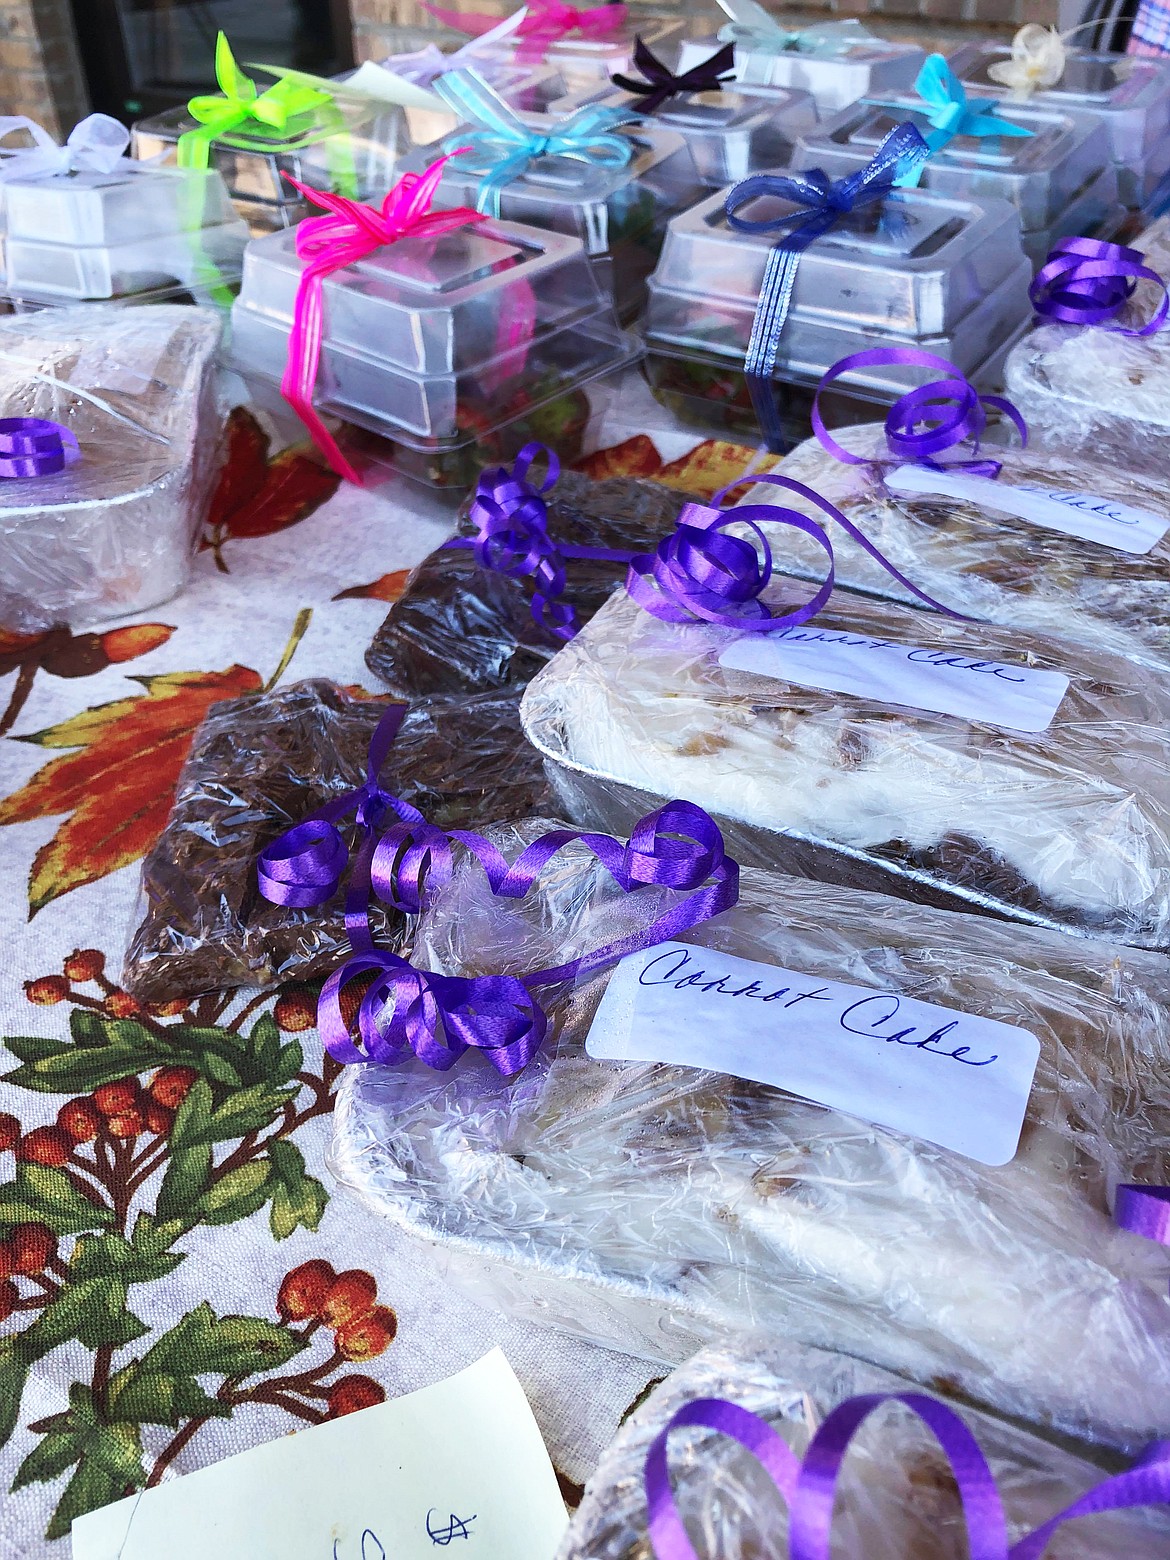 For those tht were looking for a sweet treat for mom on Sunday, they could grab a home baked good which included some beautiful ribbon wrapped around it (Erin Jusseaume/ Clark Fork Valley Press)